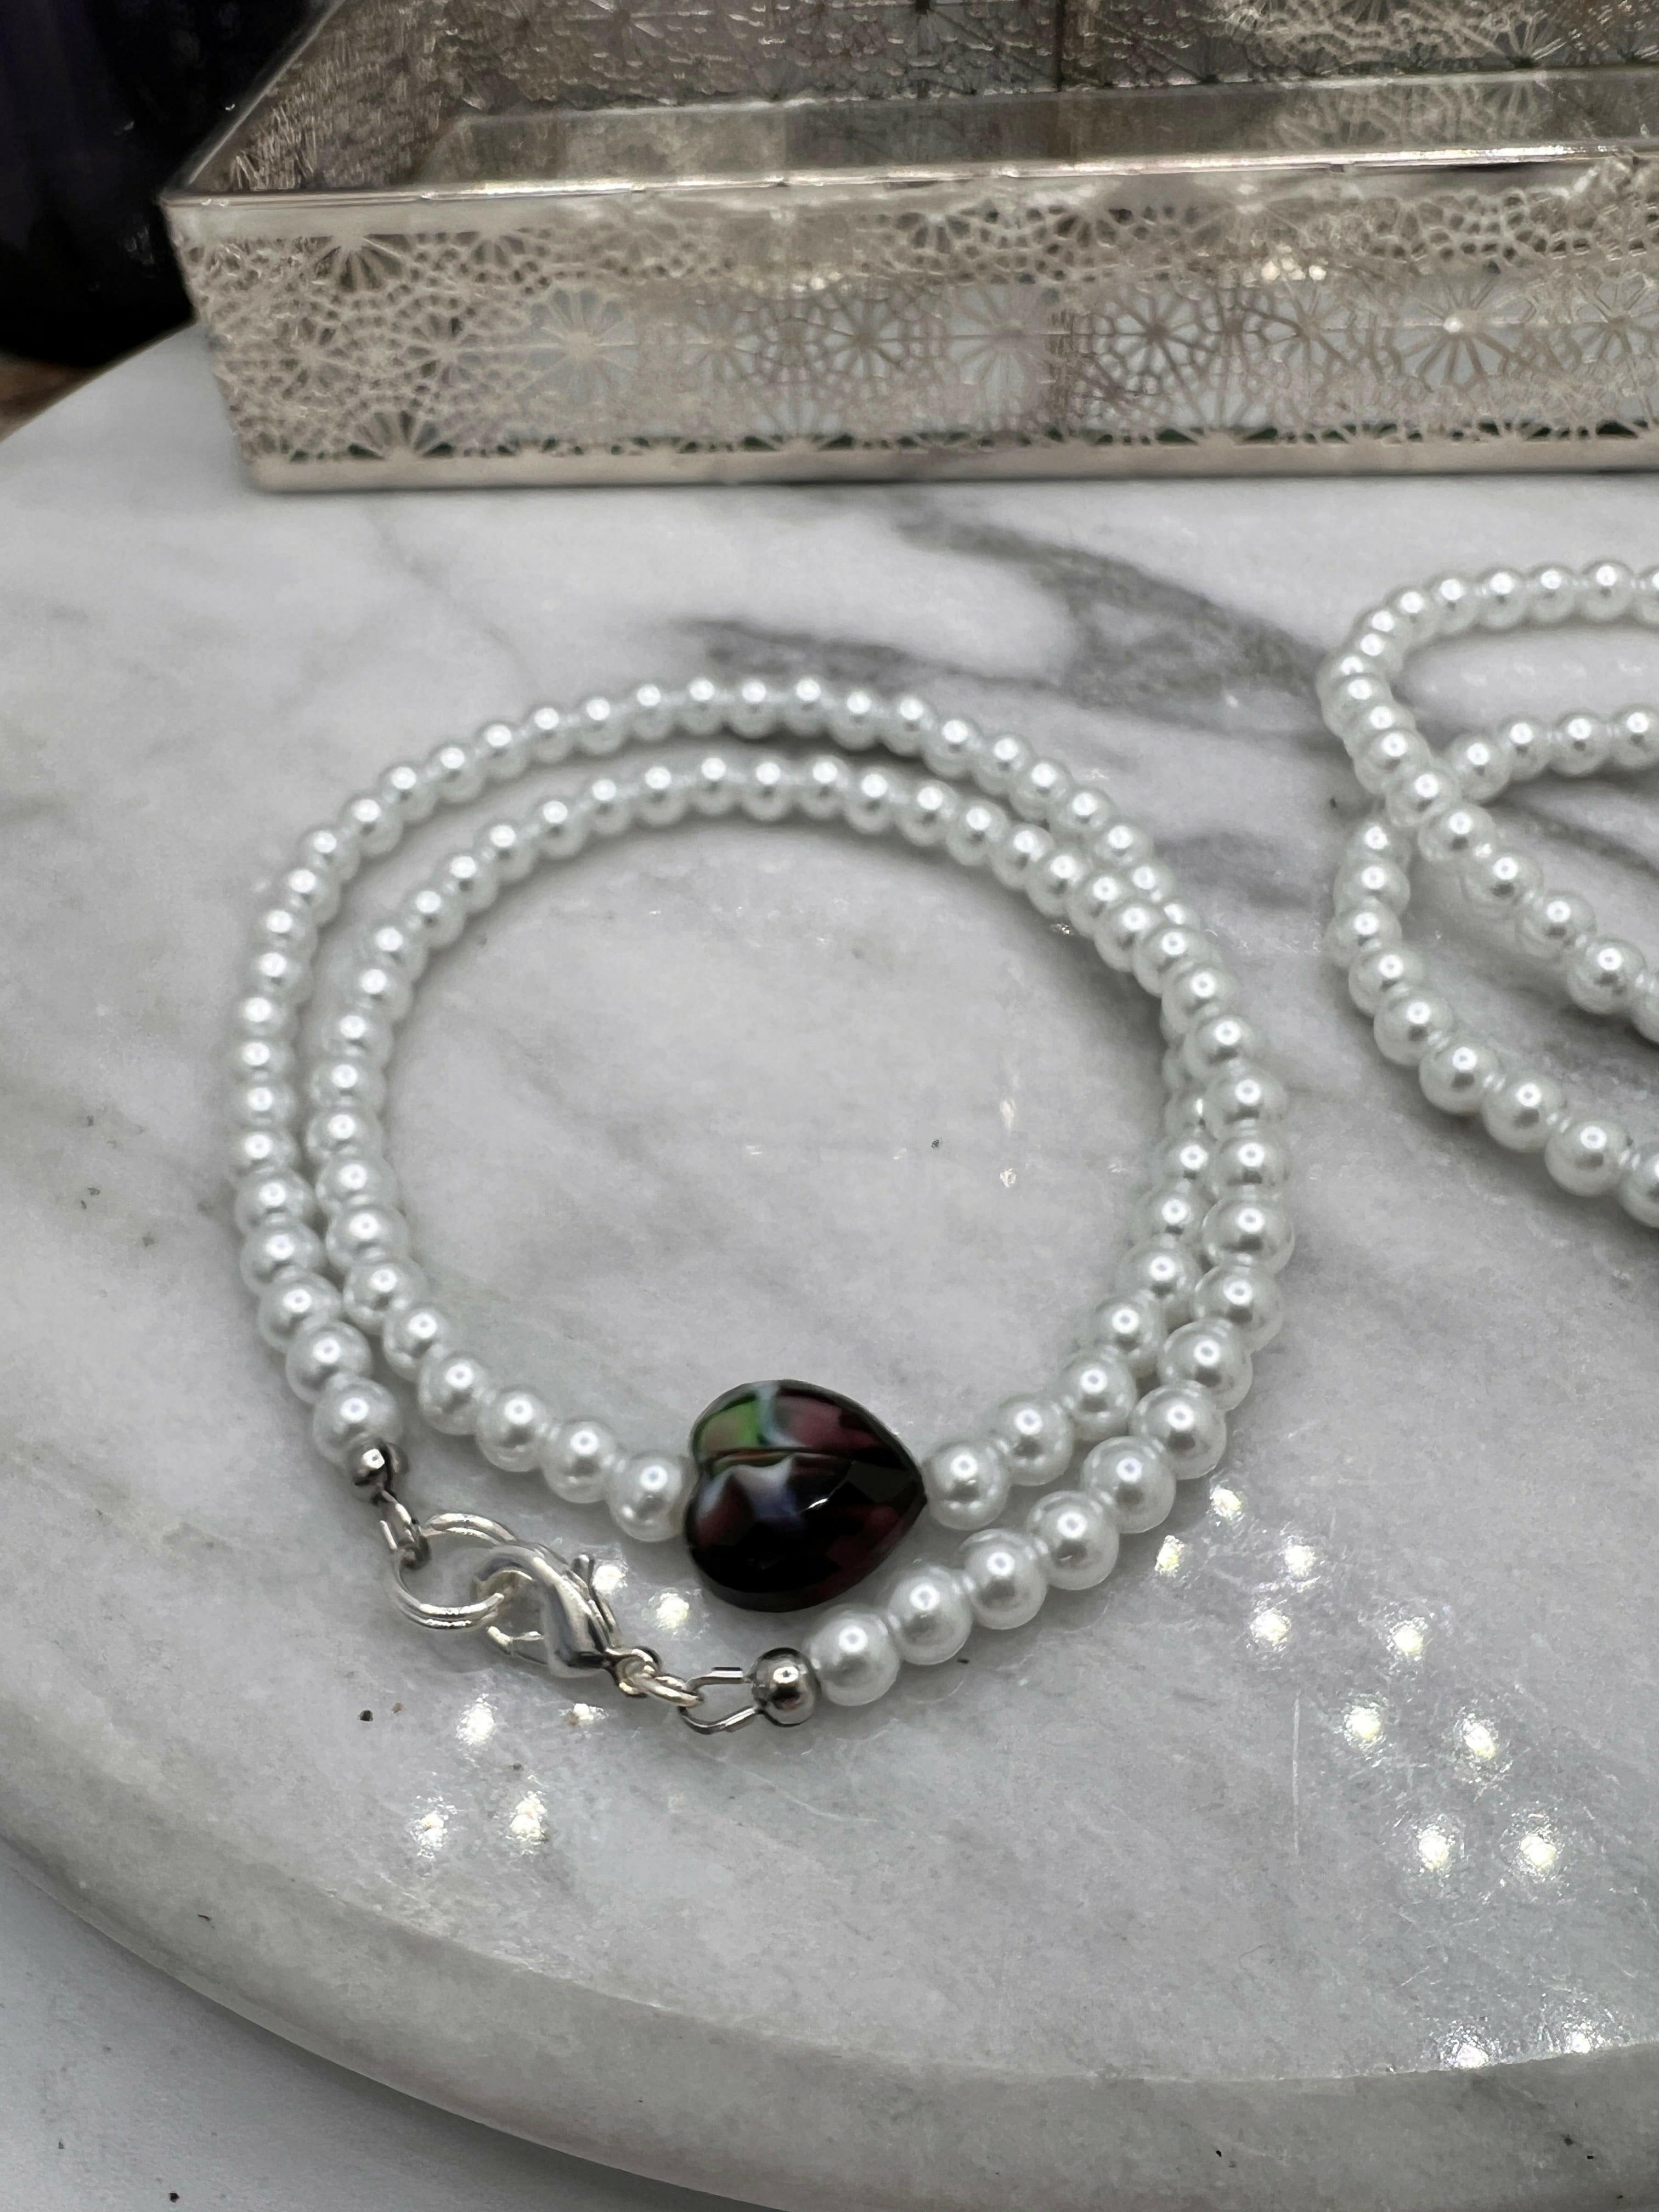 Classic white glass pearl necklace paired with matching bracelet for a sophisticated touch.